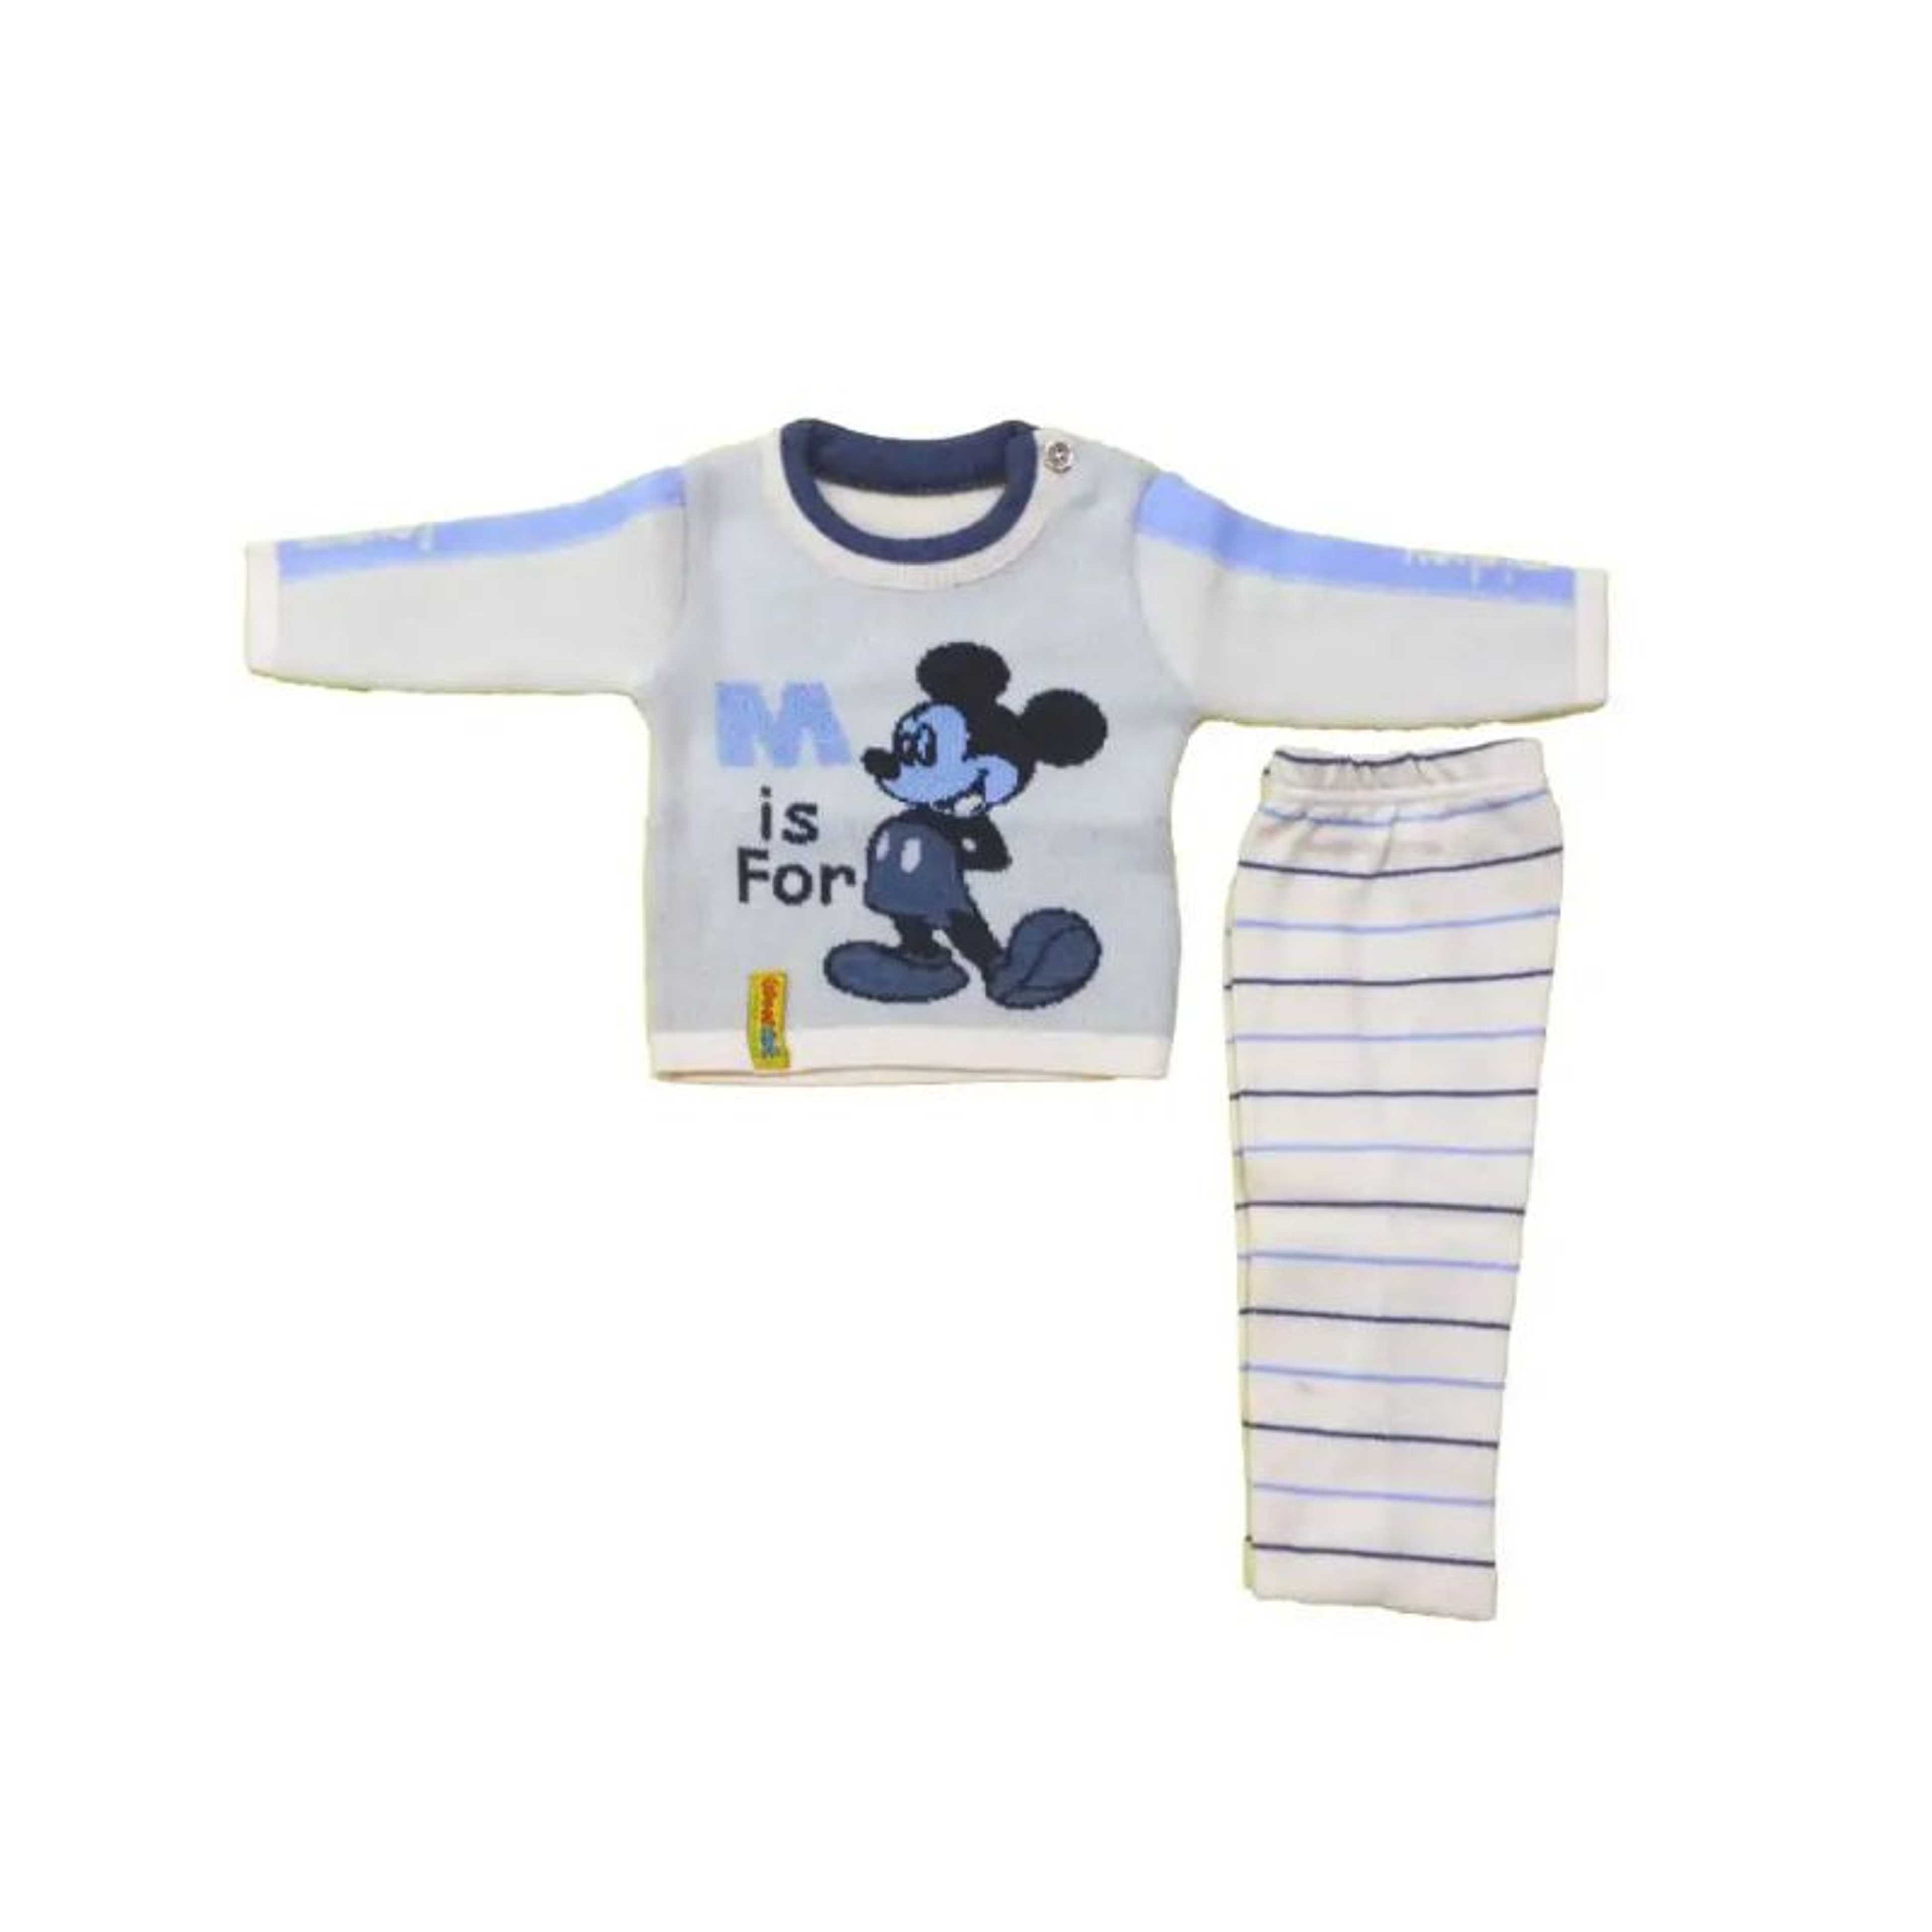 M is for Mickey Clothing set
